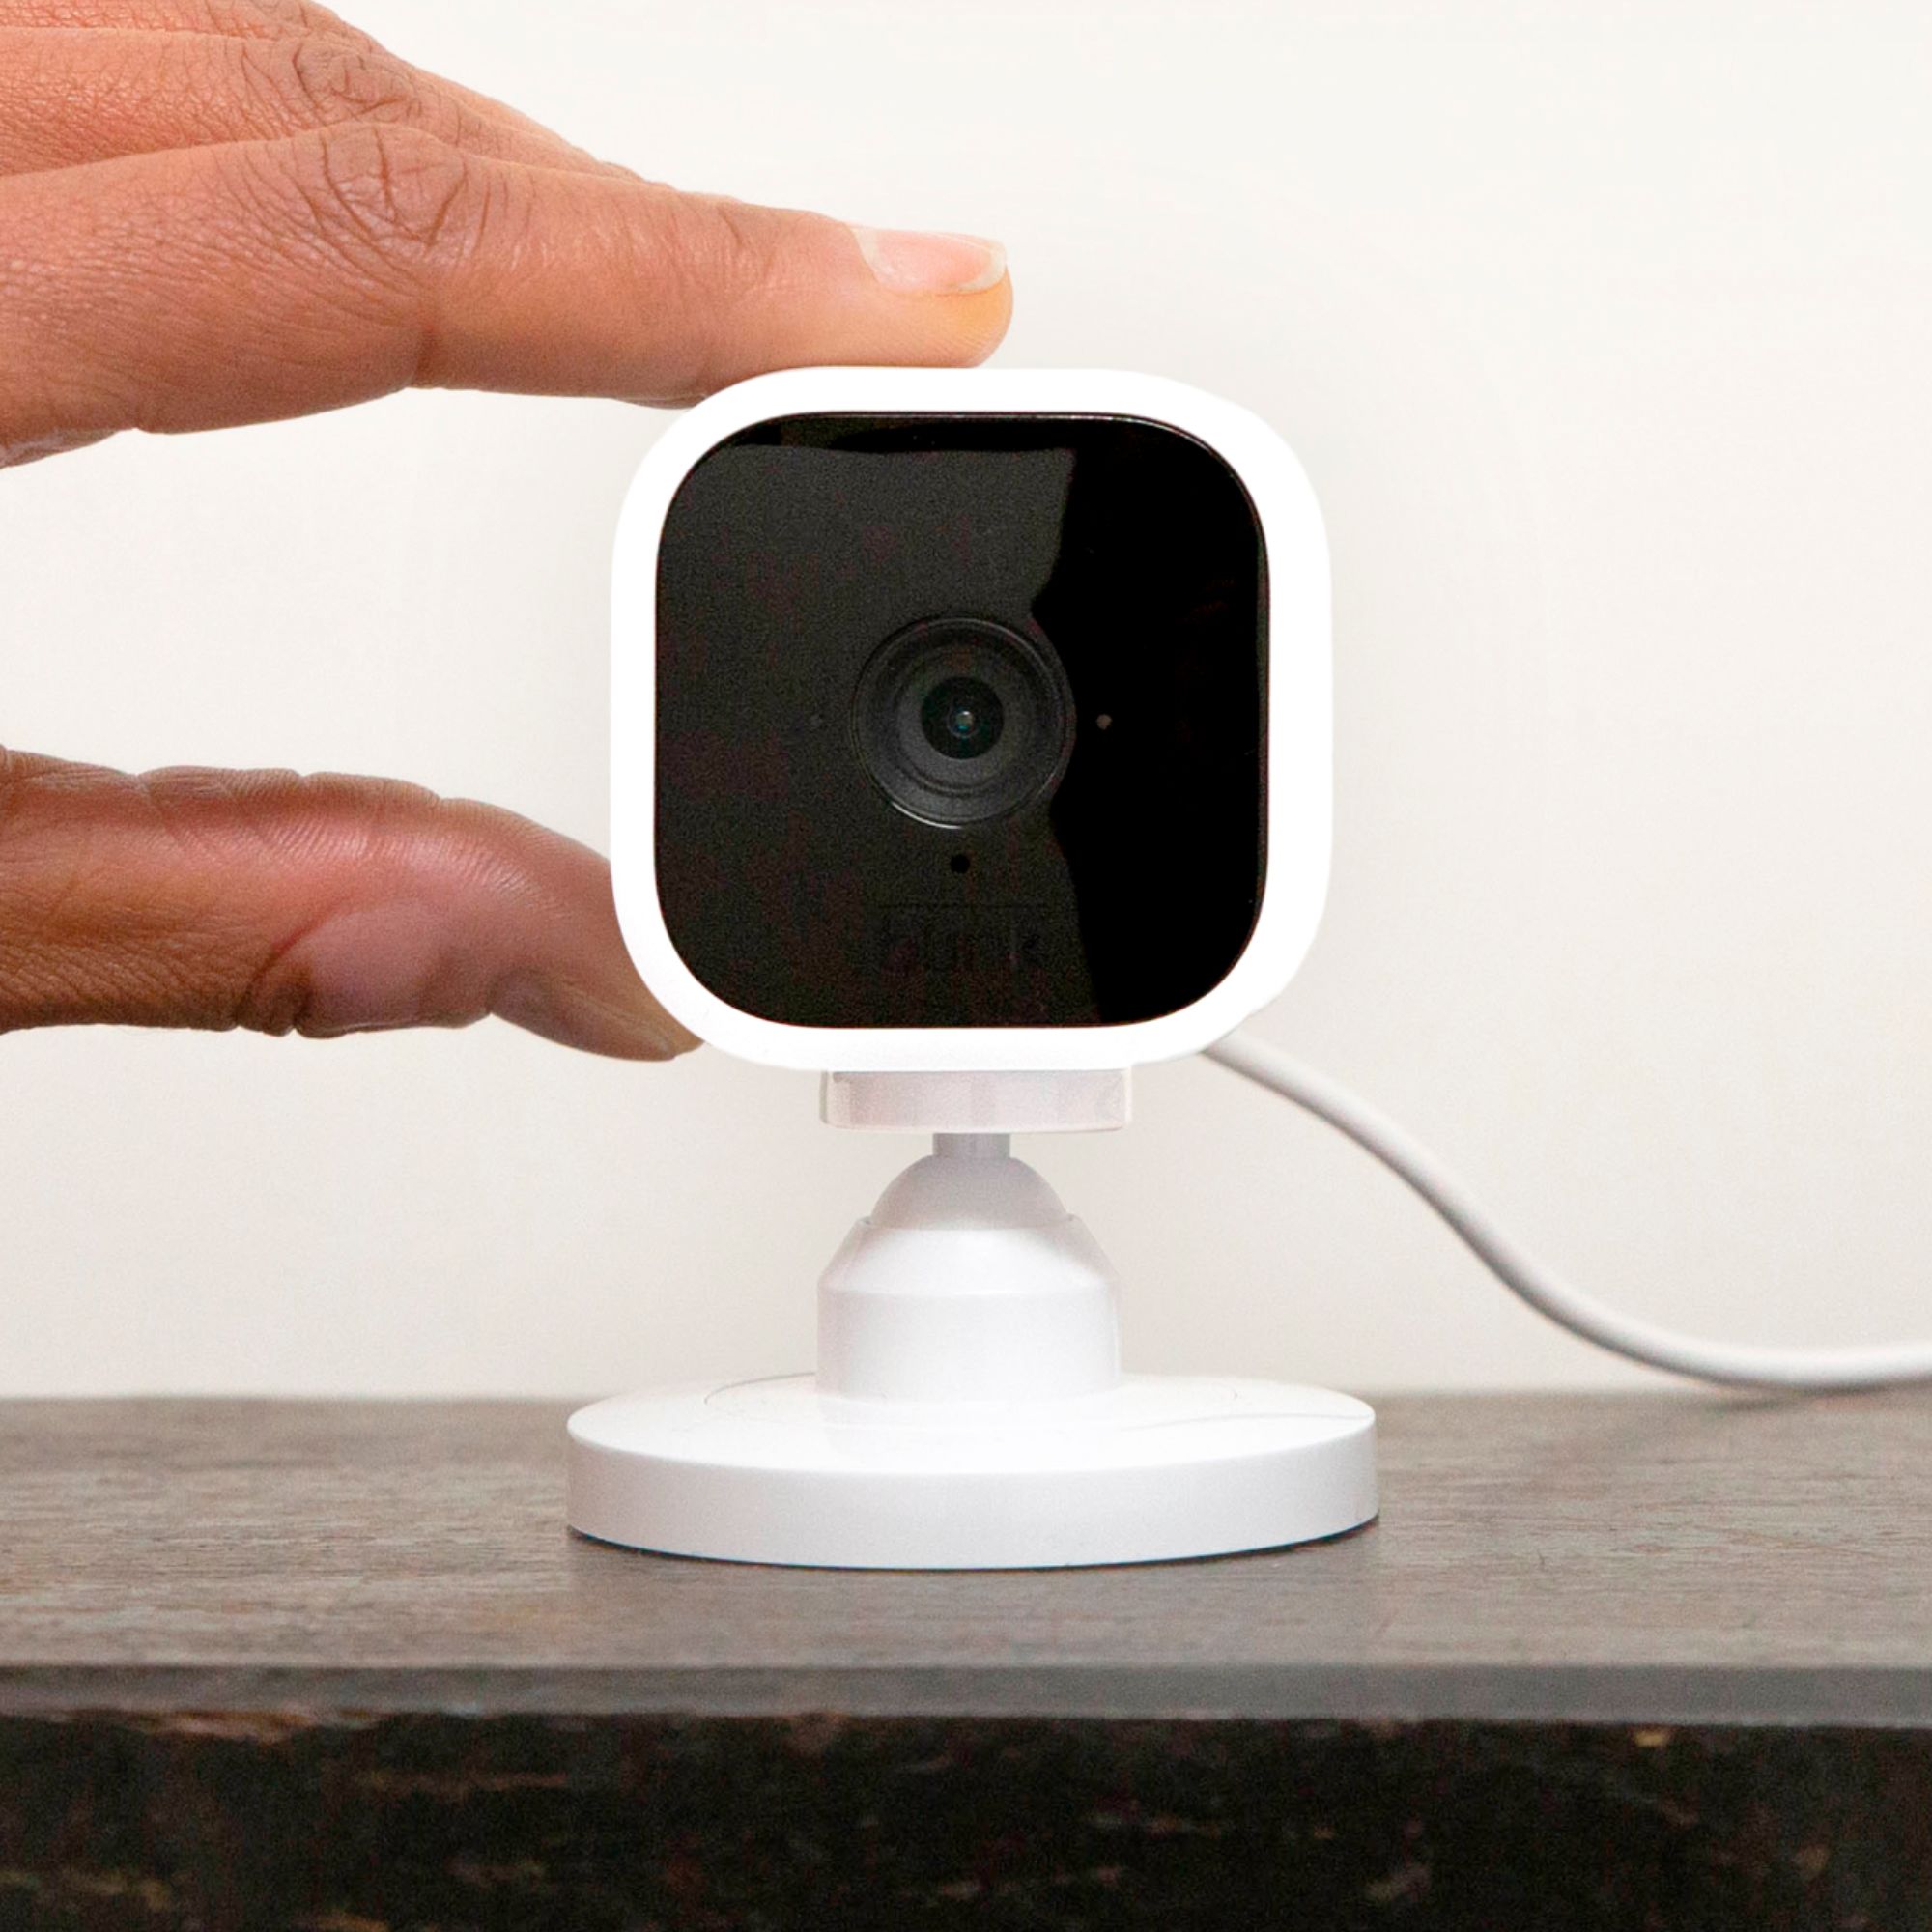 This affordable Blink home security camera is now even cheaper